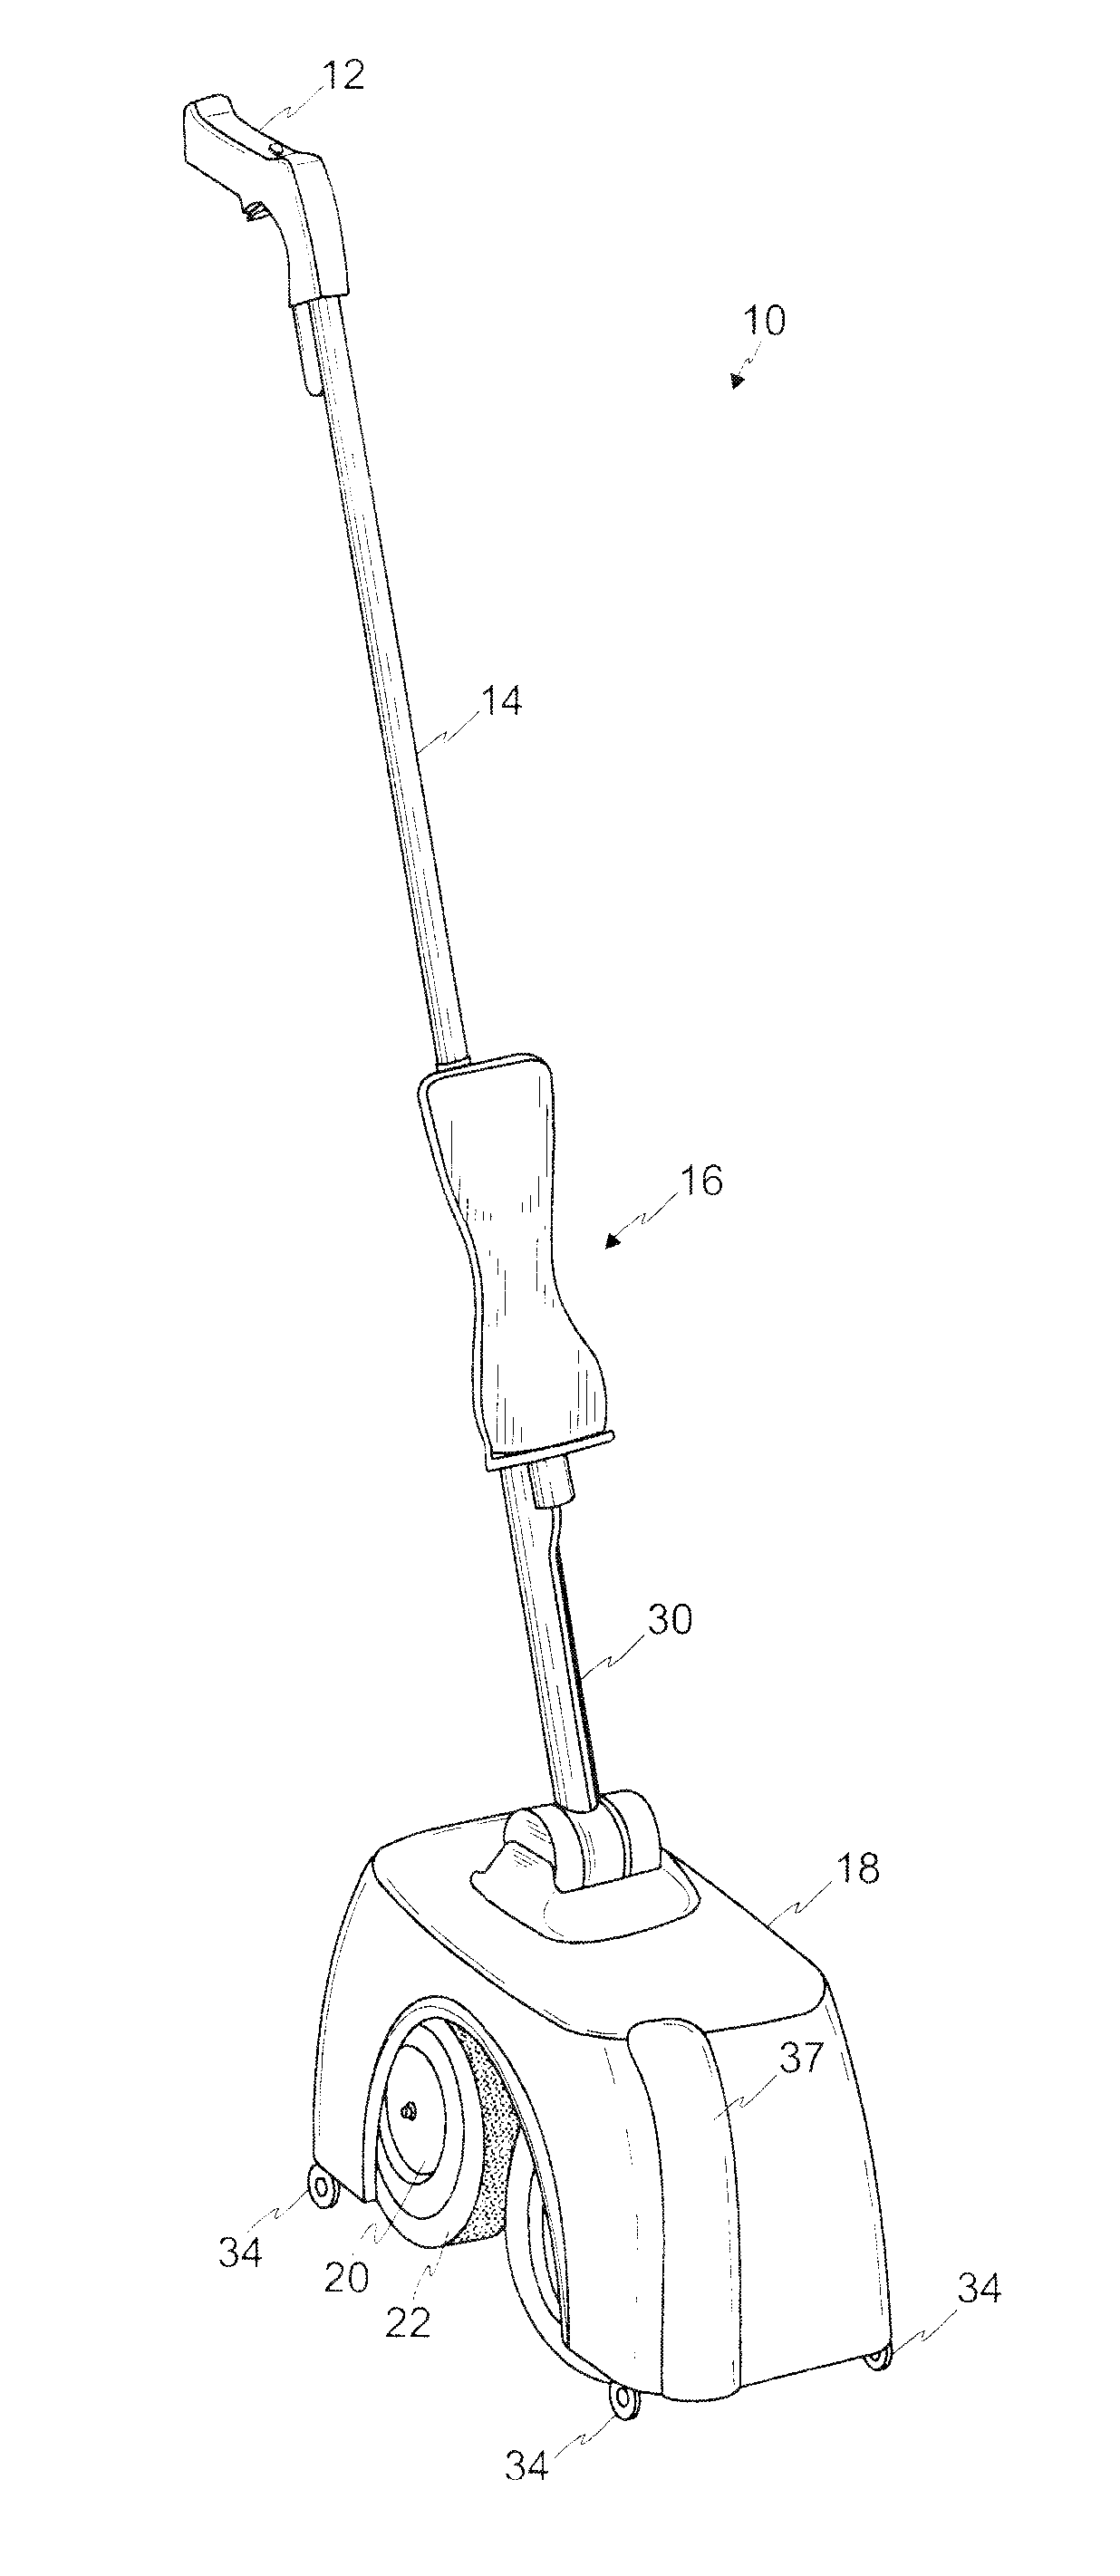 Grout cleaning apparatus